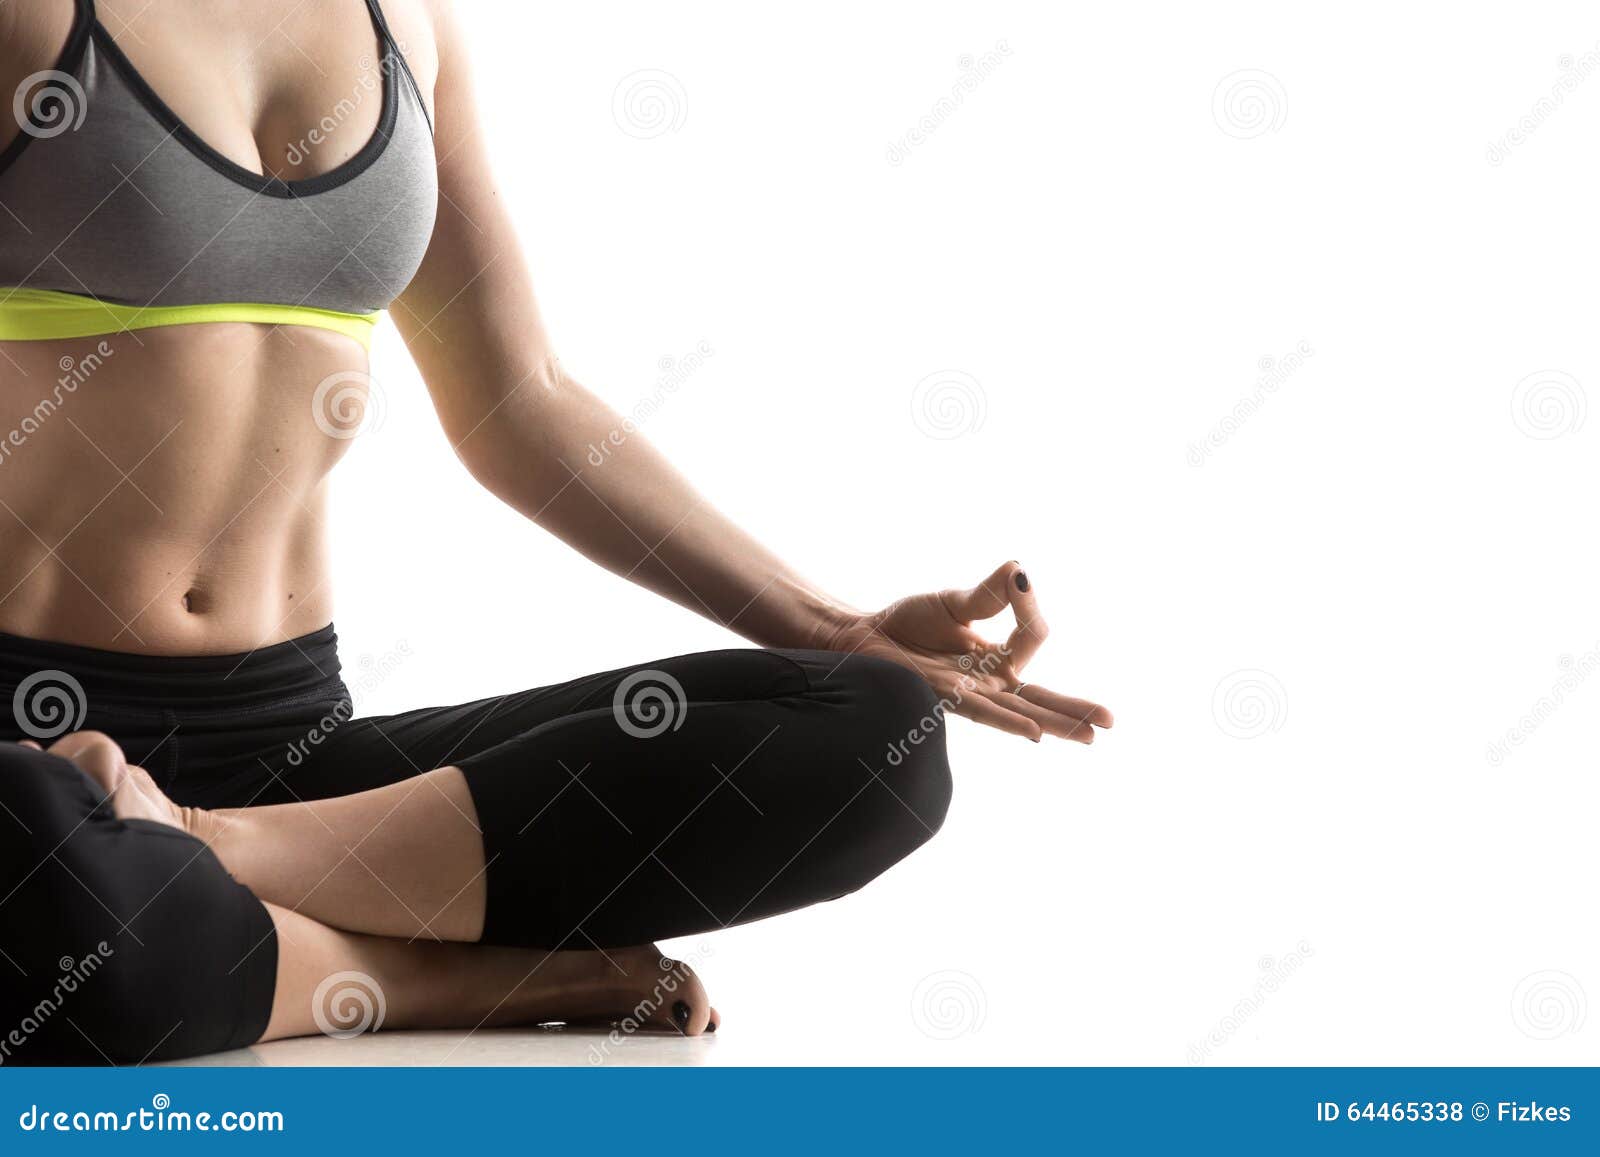 Man practicing yoga in tree pose. Vector illustration. Square layout.  Royalty-Free Stock Image - Storyblocks